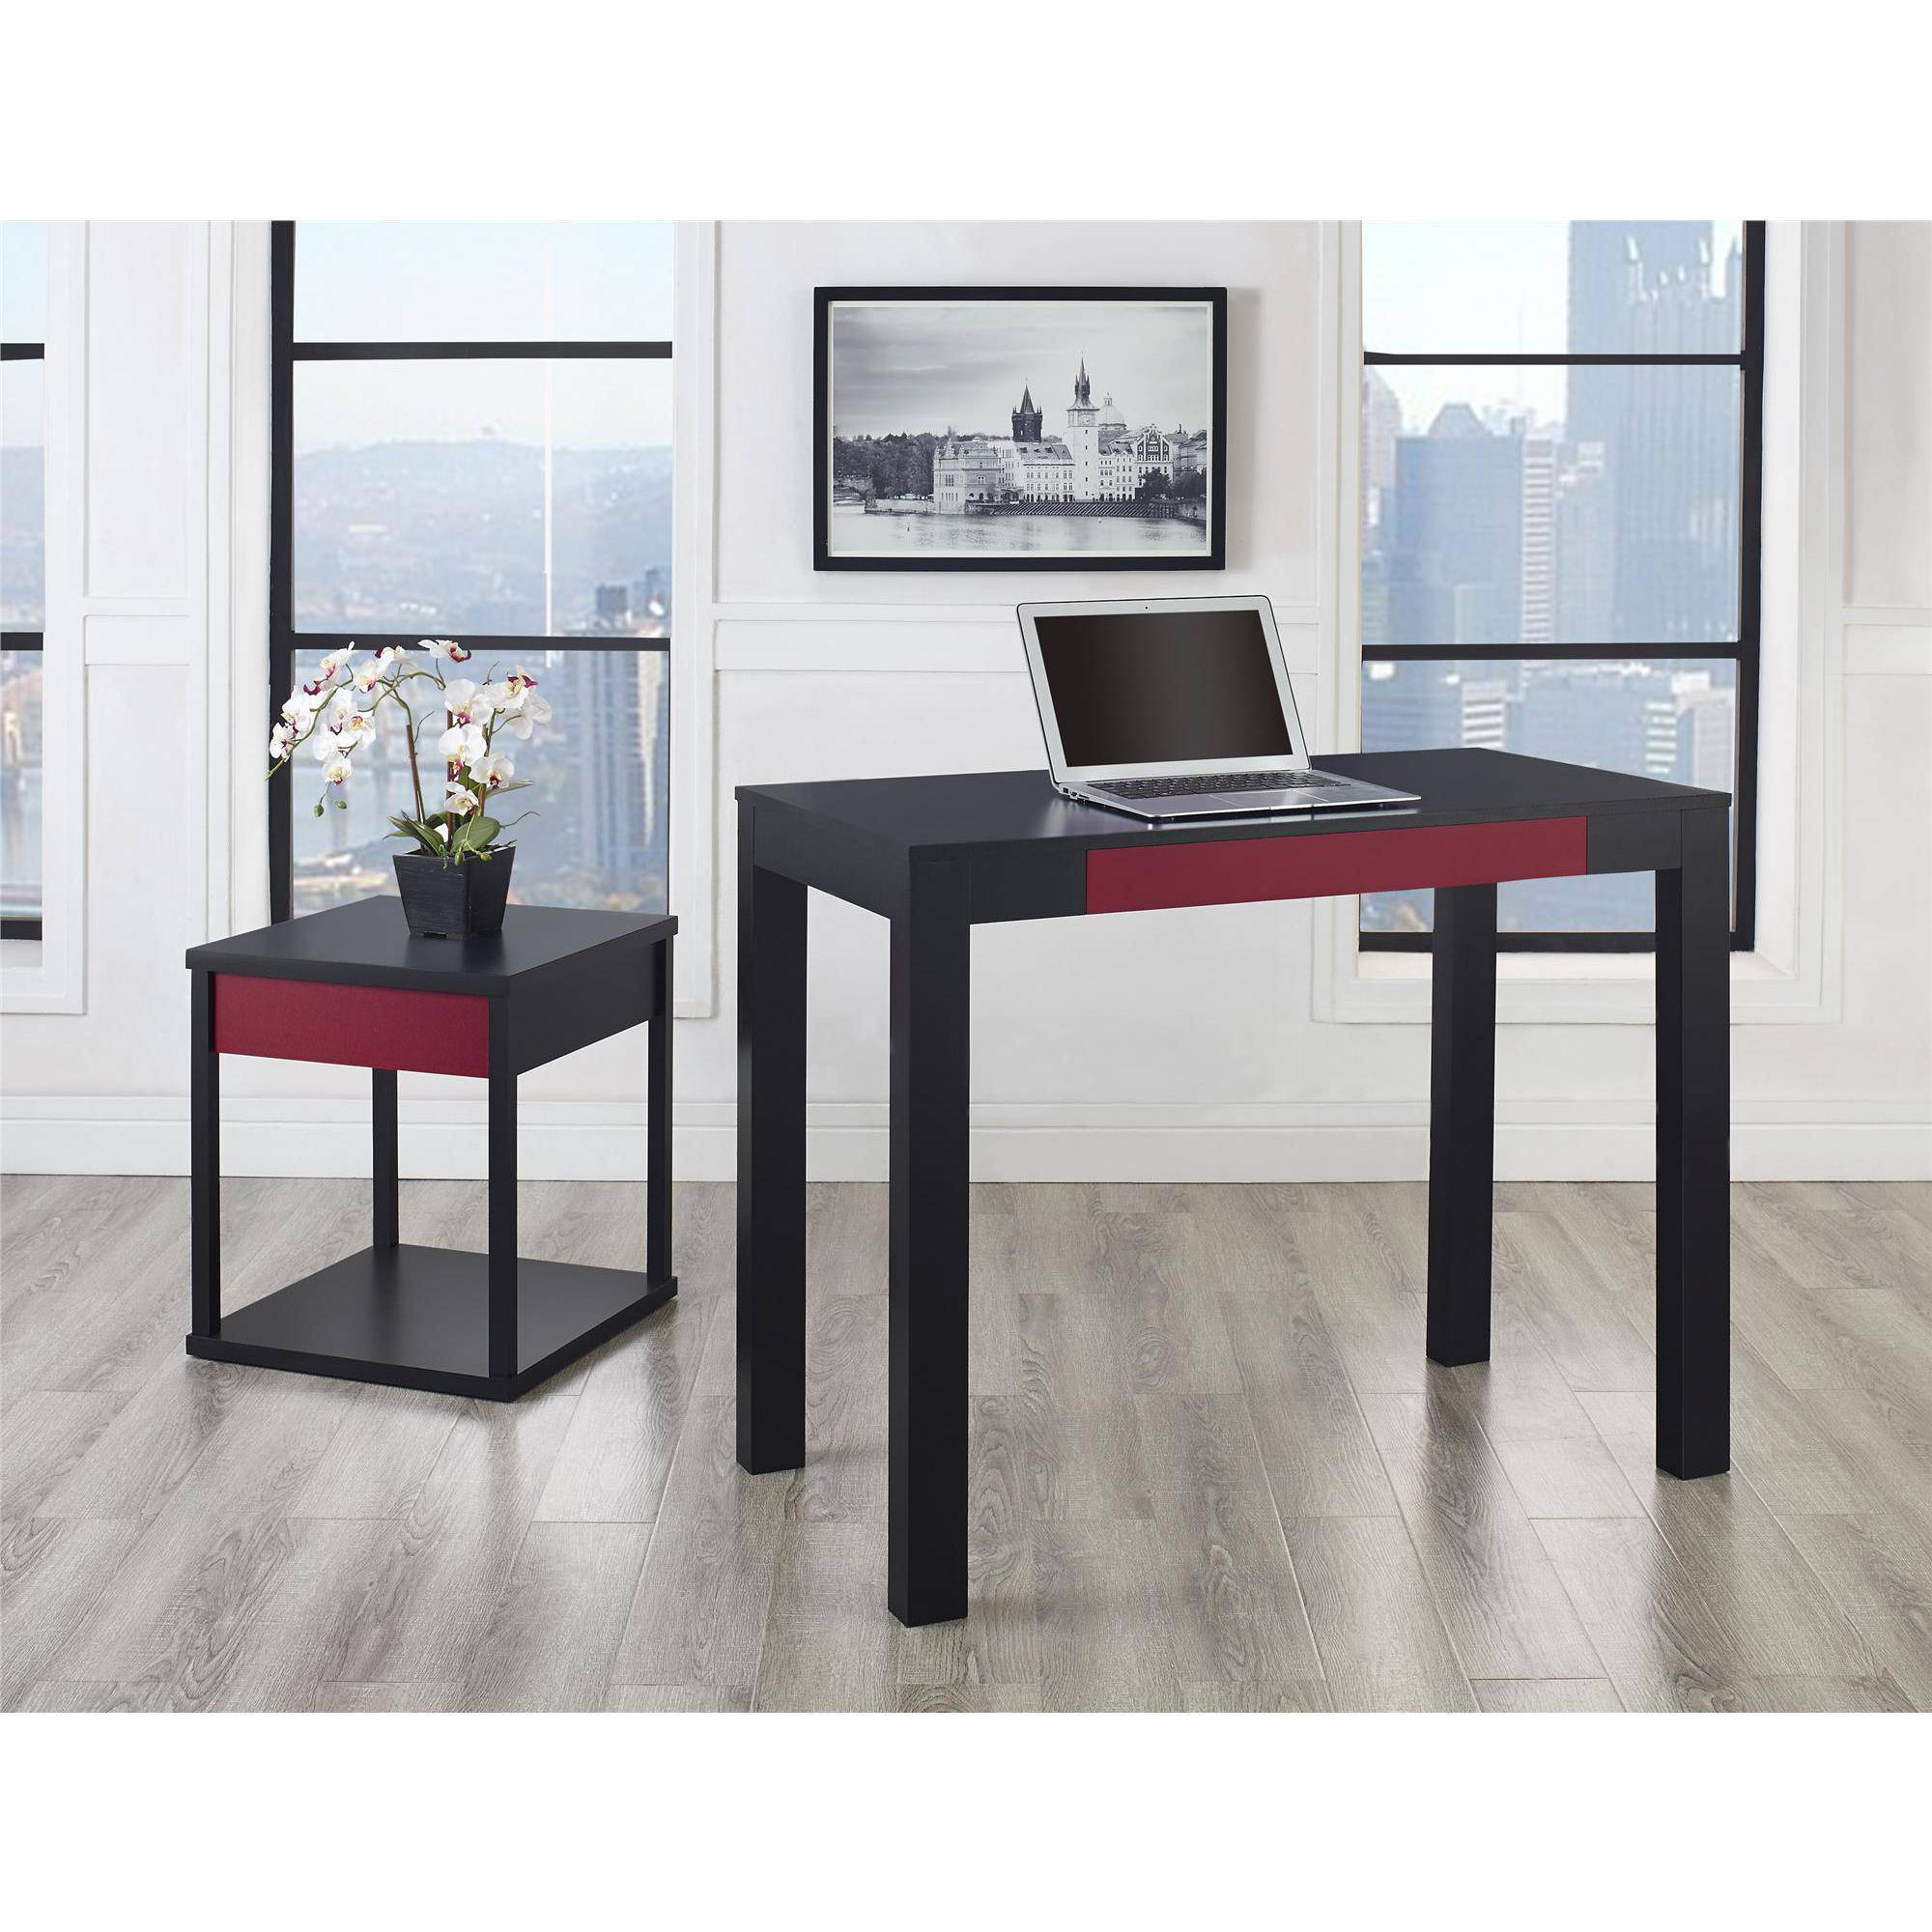 Parsons Desk With Colored Drawer, Multiple Colors - image 5 of 6